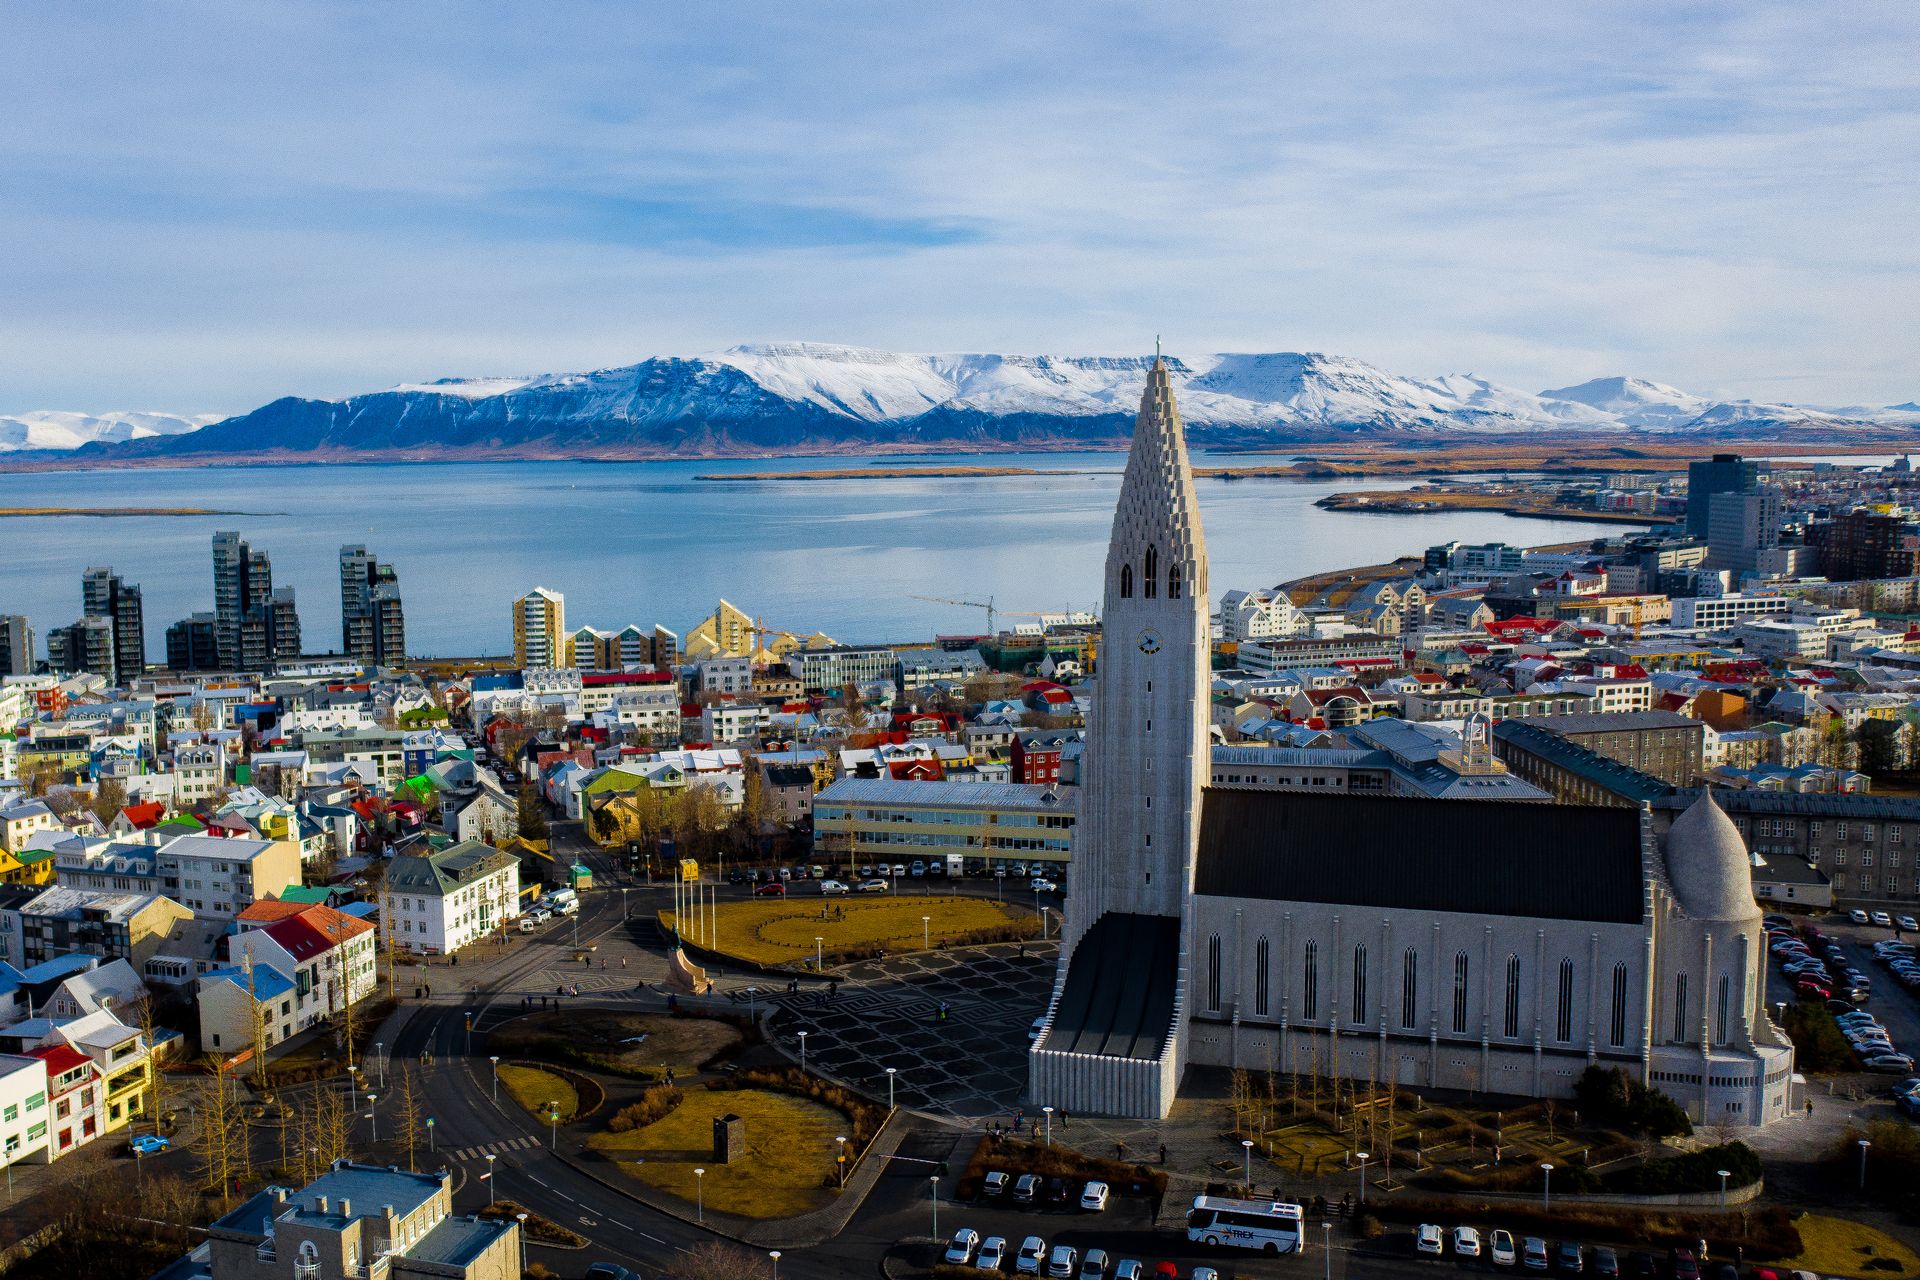 Hallgrímskirkja's imposing facade and unique architecture with Reykjavík cityscape in the background